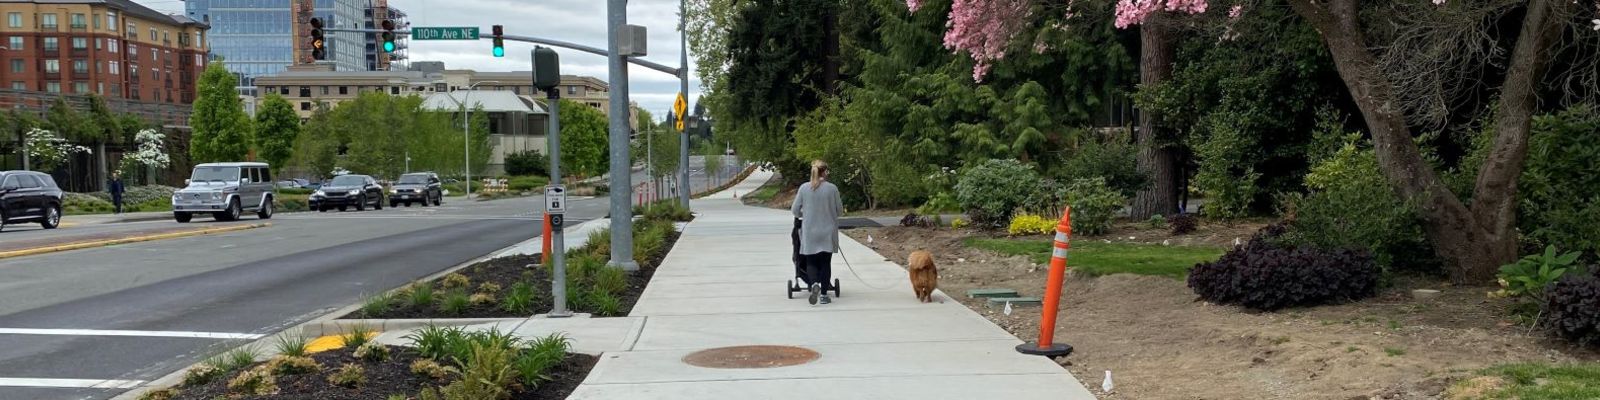 Pedestrian and dog on multipurpose path